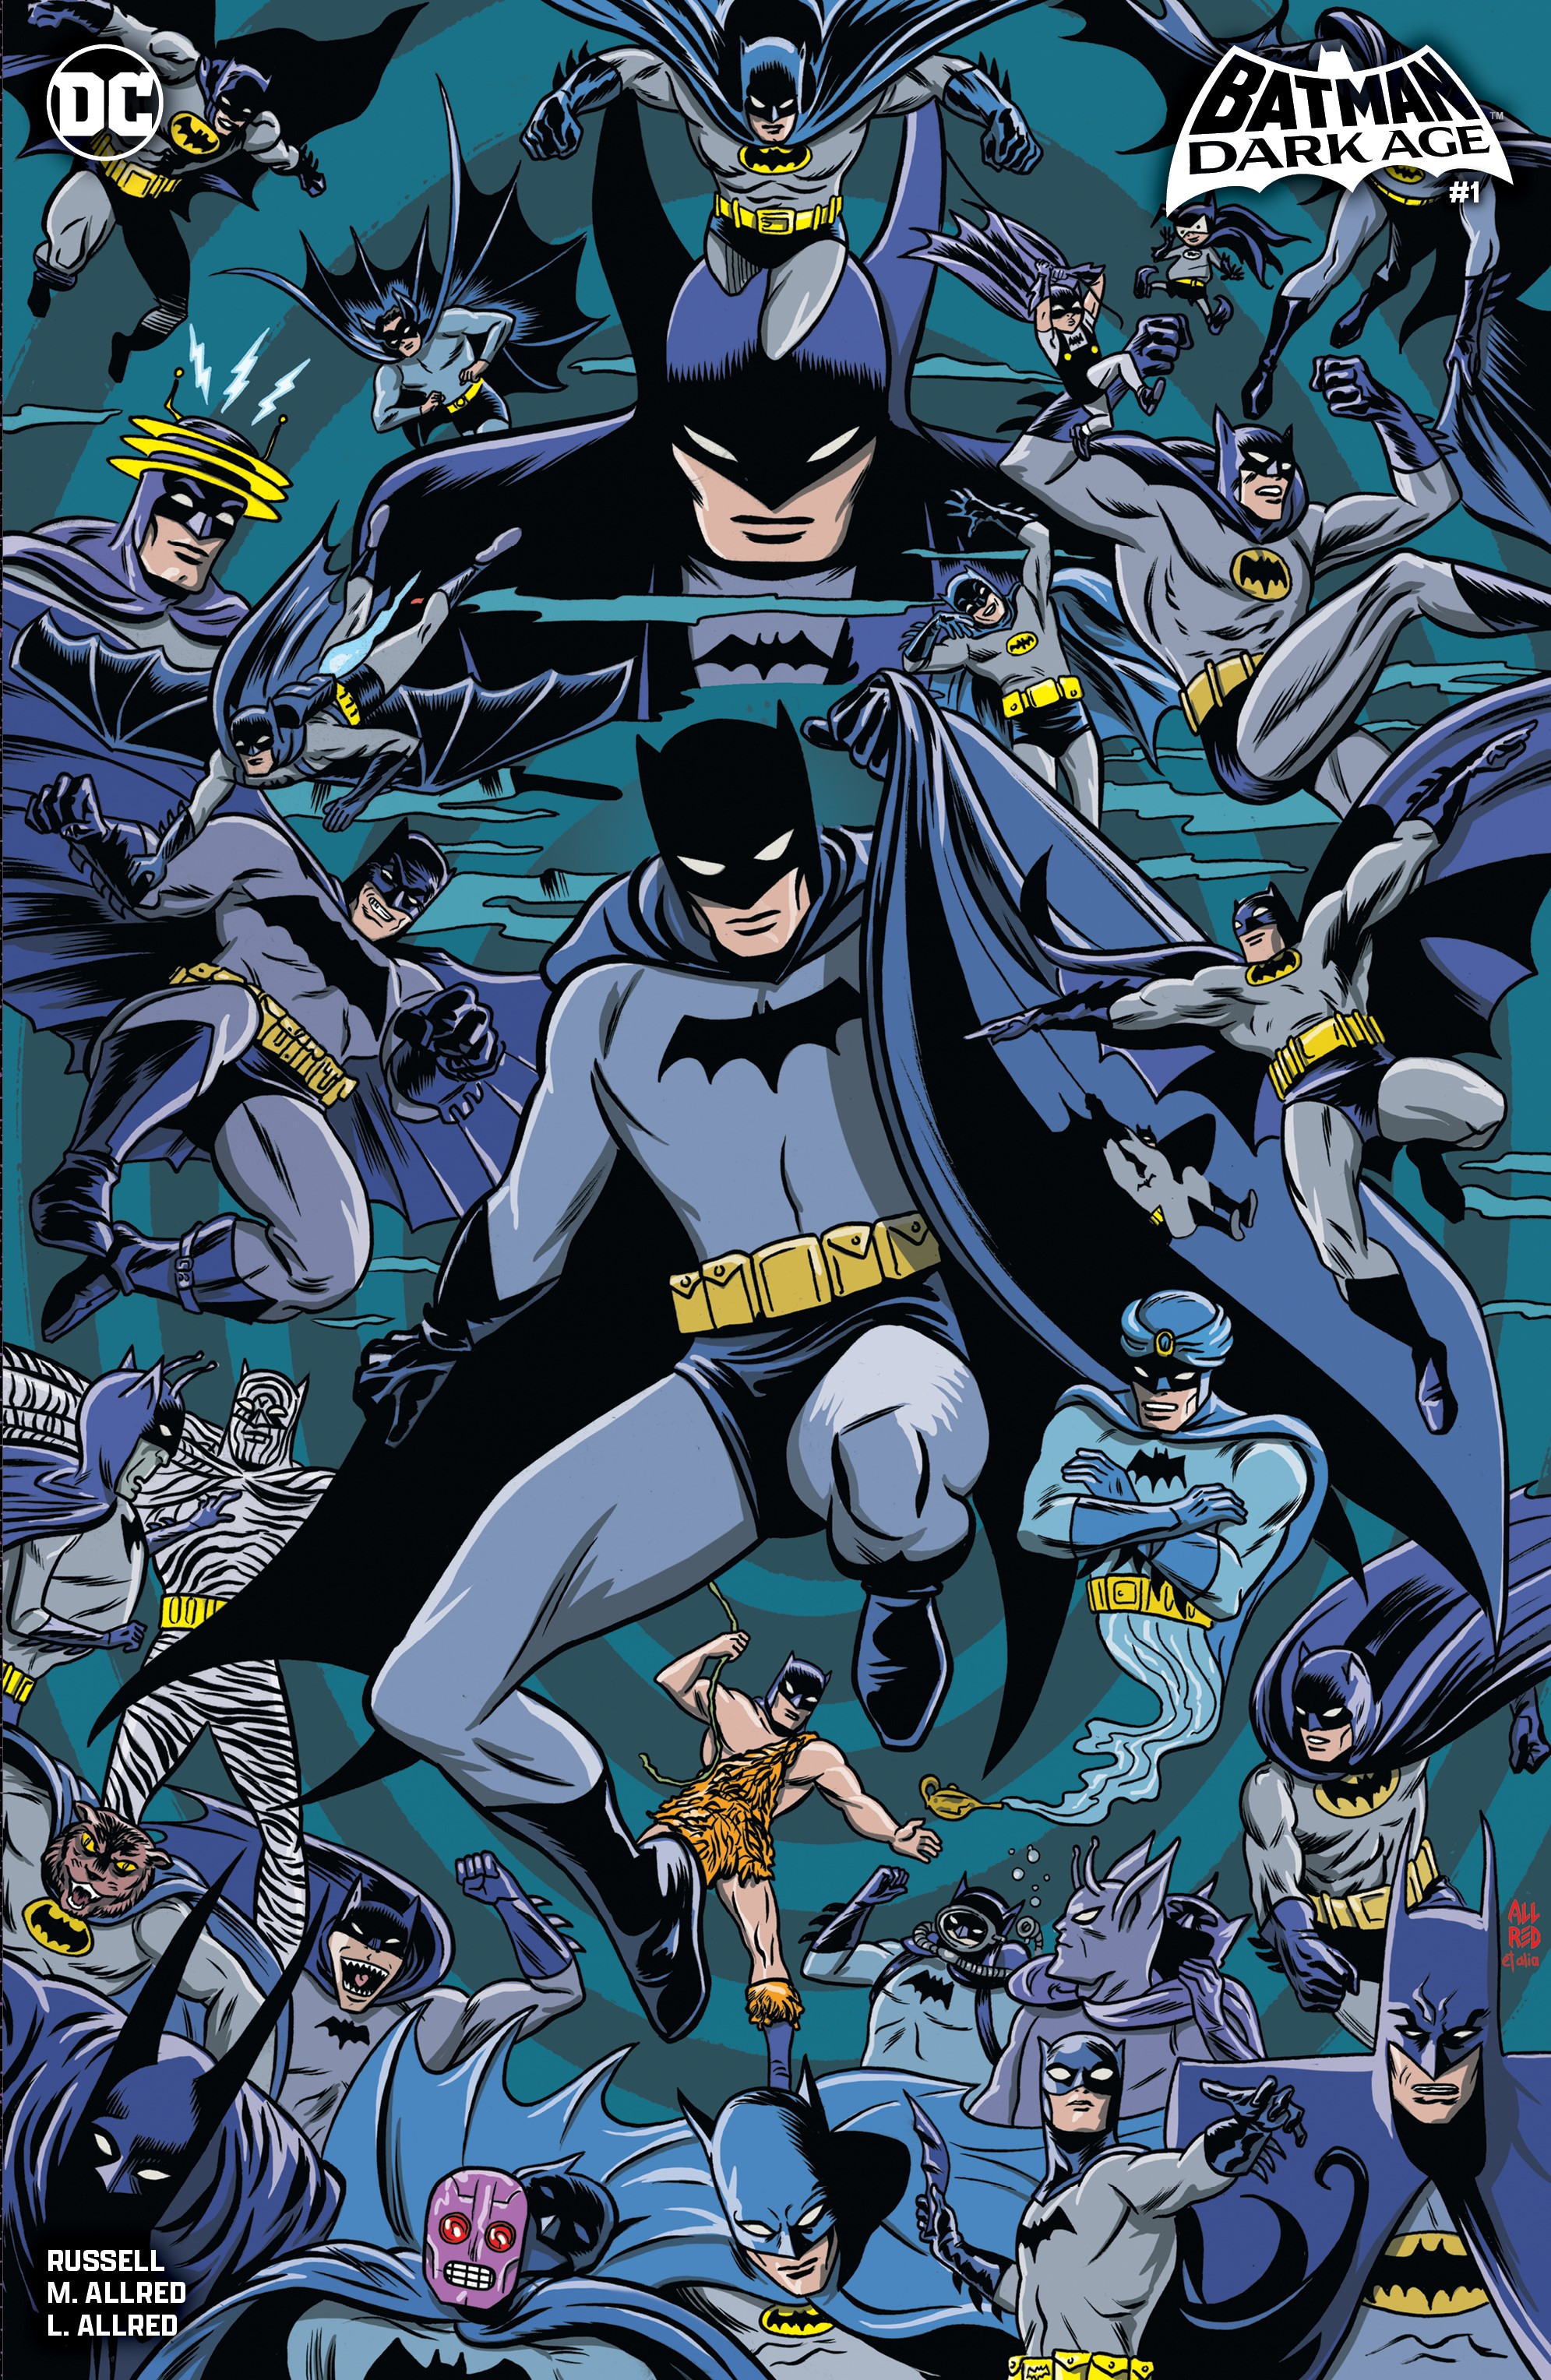 Batman Dark Age #1 Cover D 1 for 25 Incentive Michael Allred Card Stock Variant (Of 6)